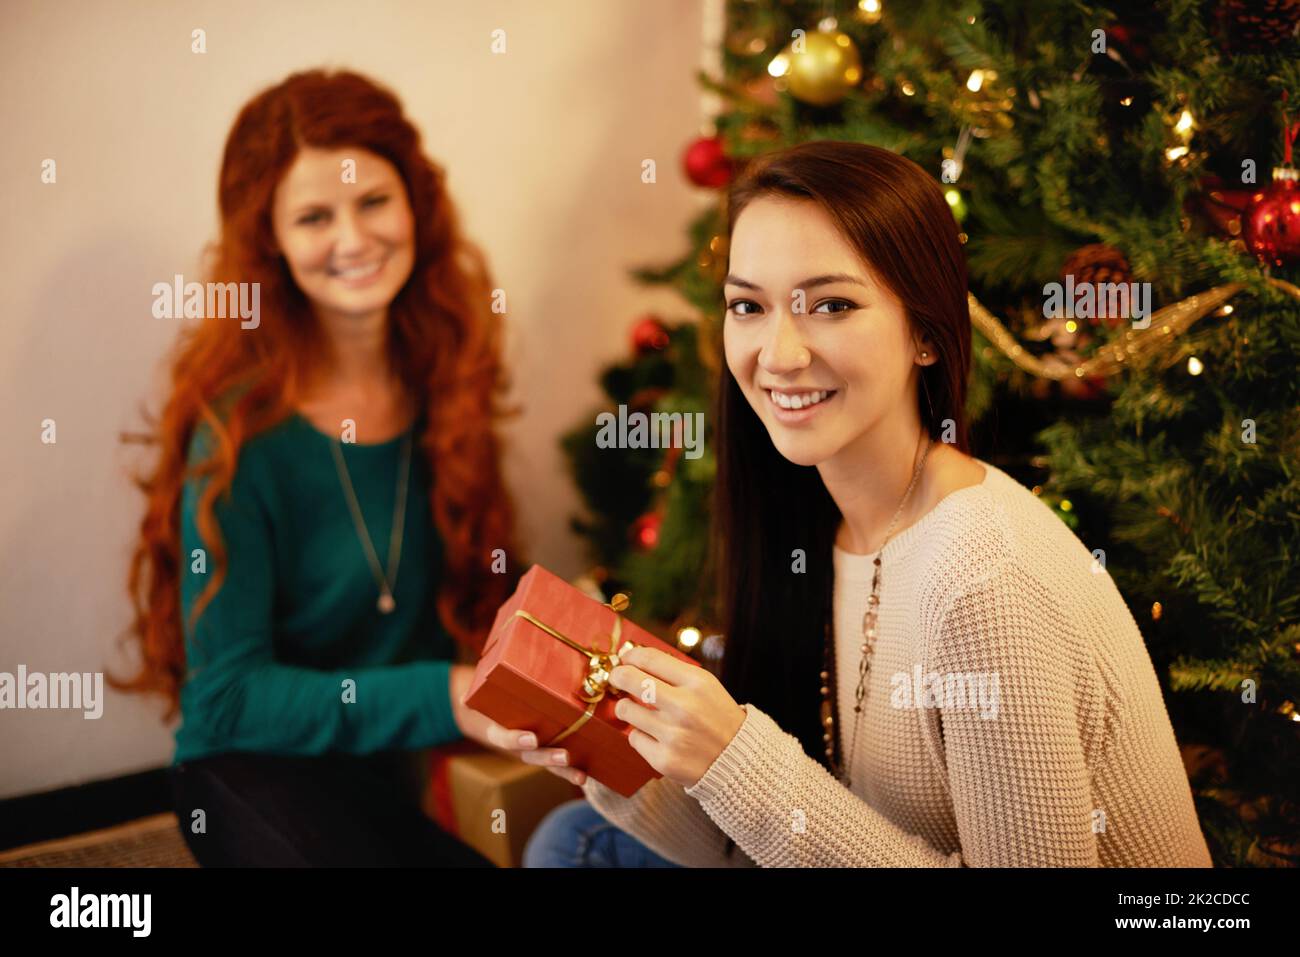 Time for presents. Cropped portrait of two young women sitting by a christmas tree. Stock Photo